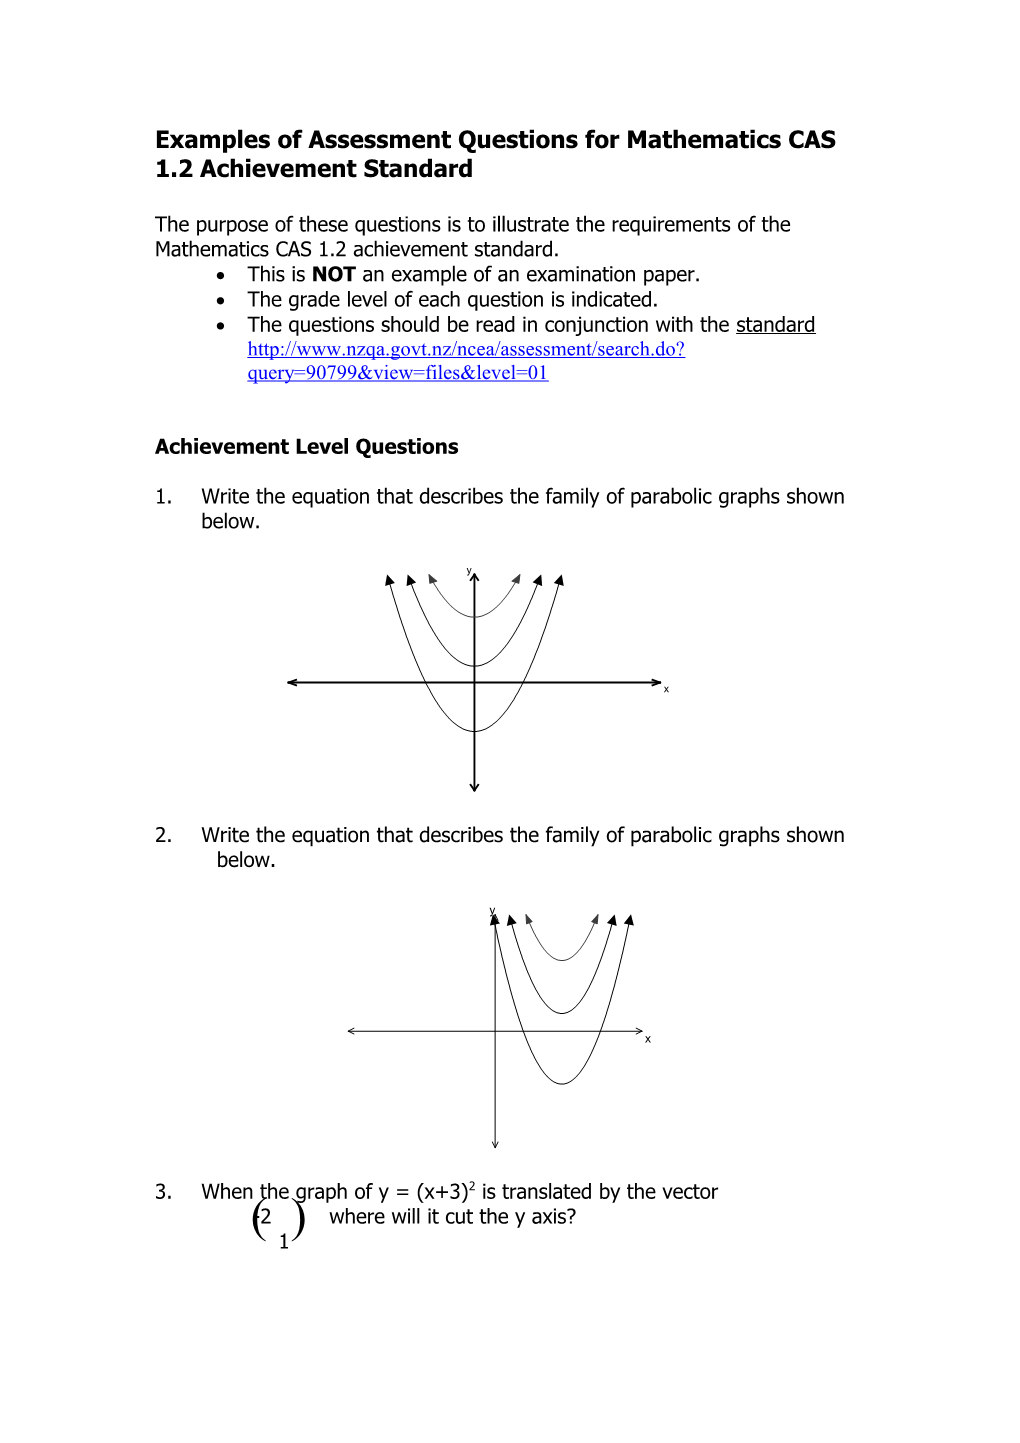 Examples of Assessment Questions for the Draft Mathematics CAS 1